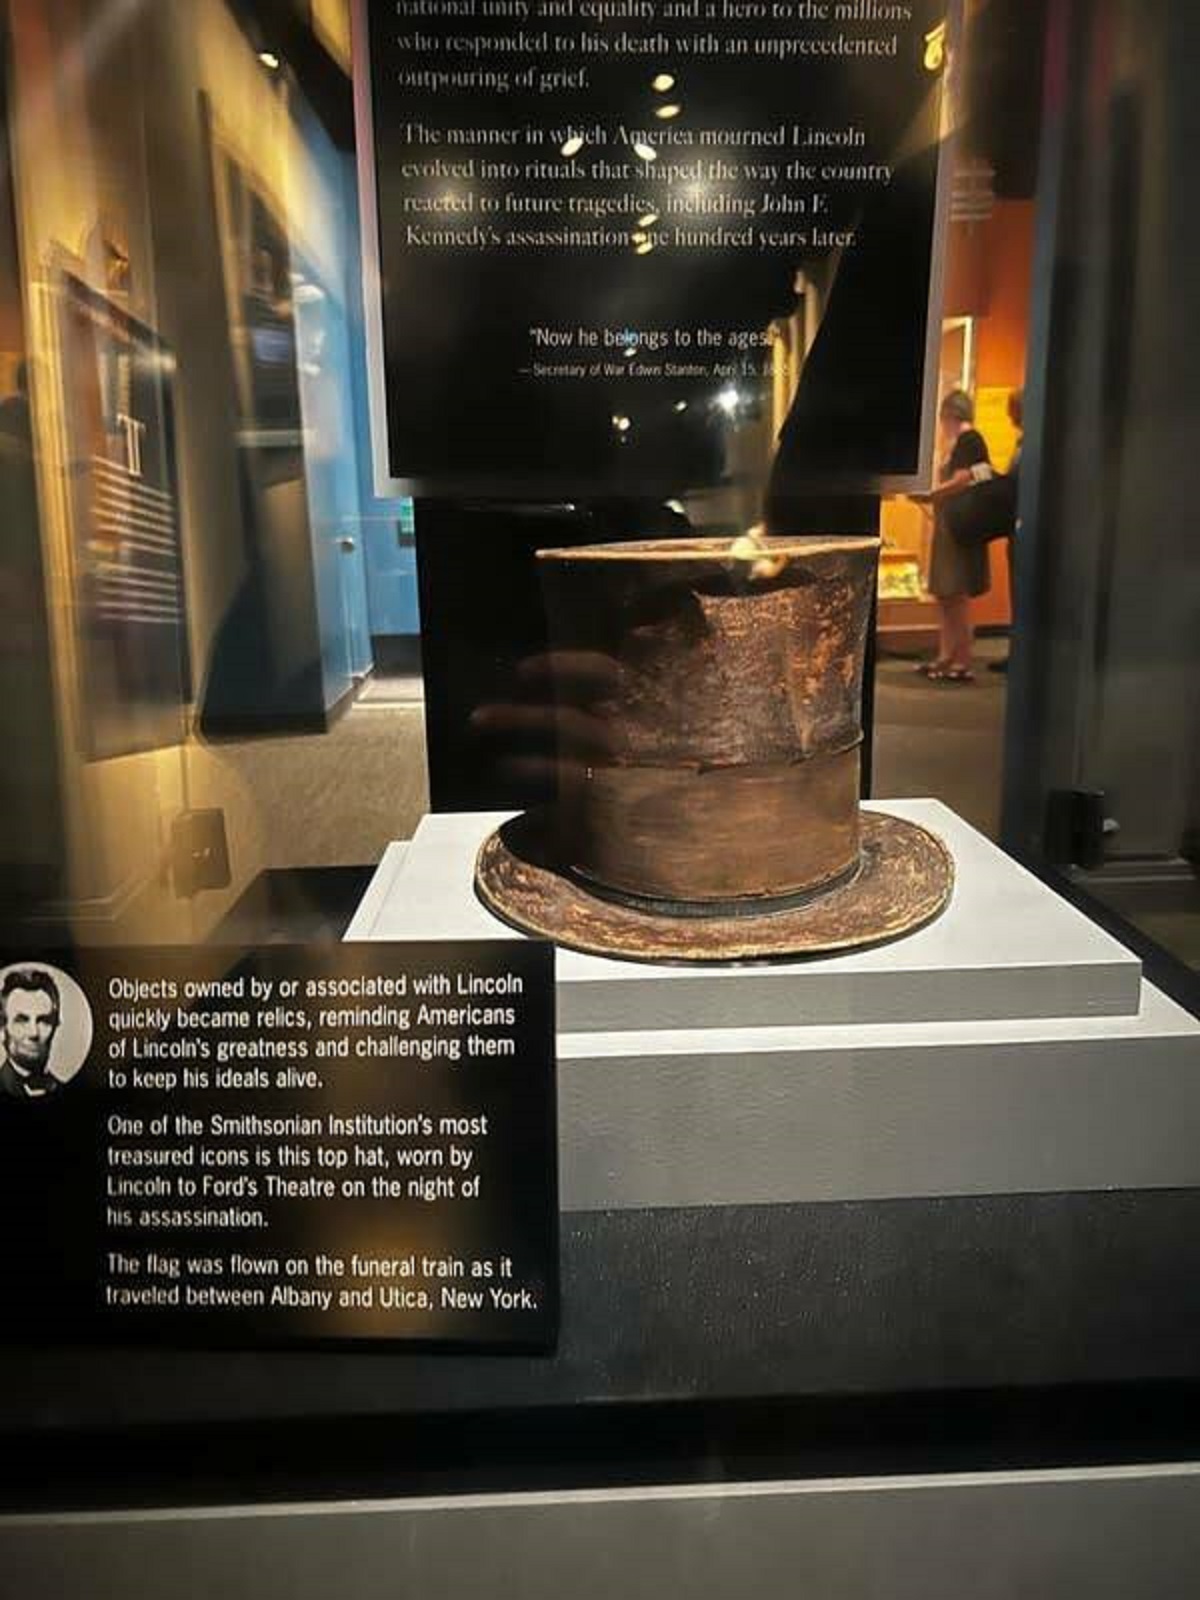 The top hat Abraham Lincoln was wearing the night he was assassinated.